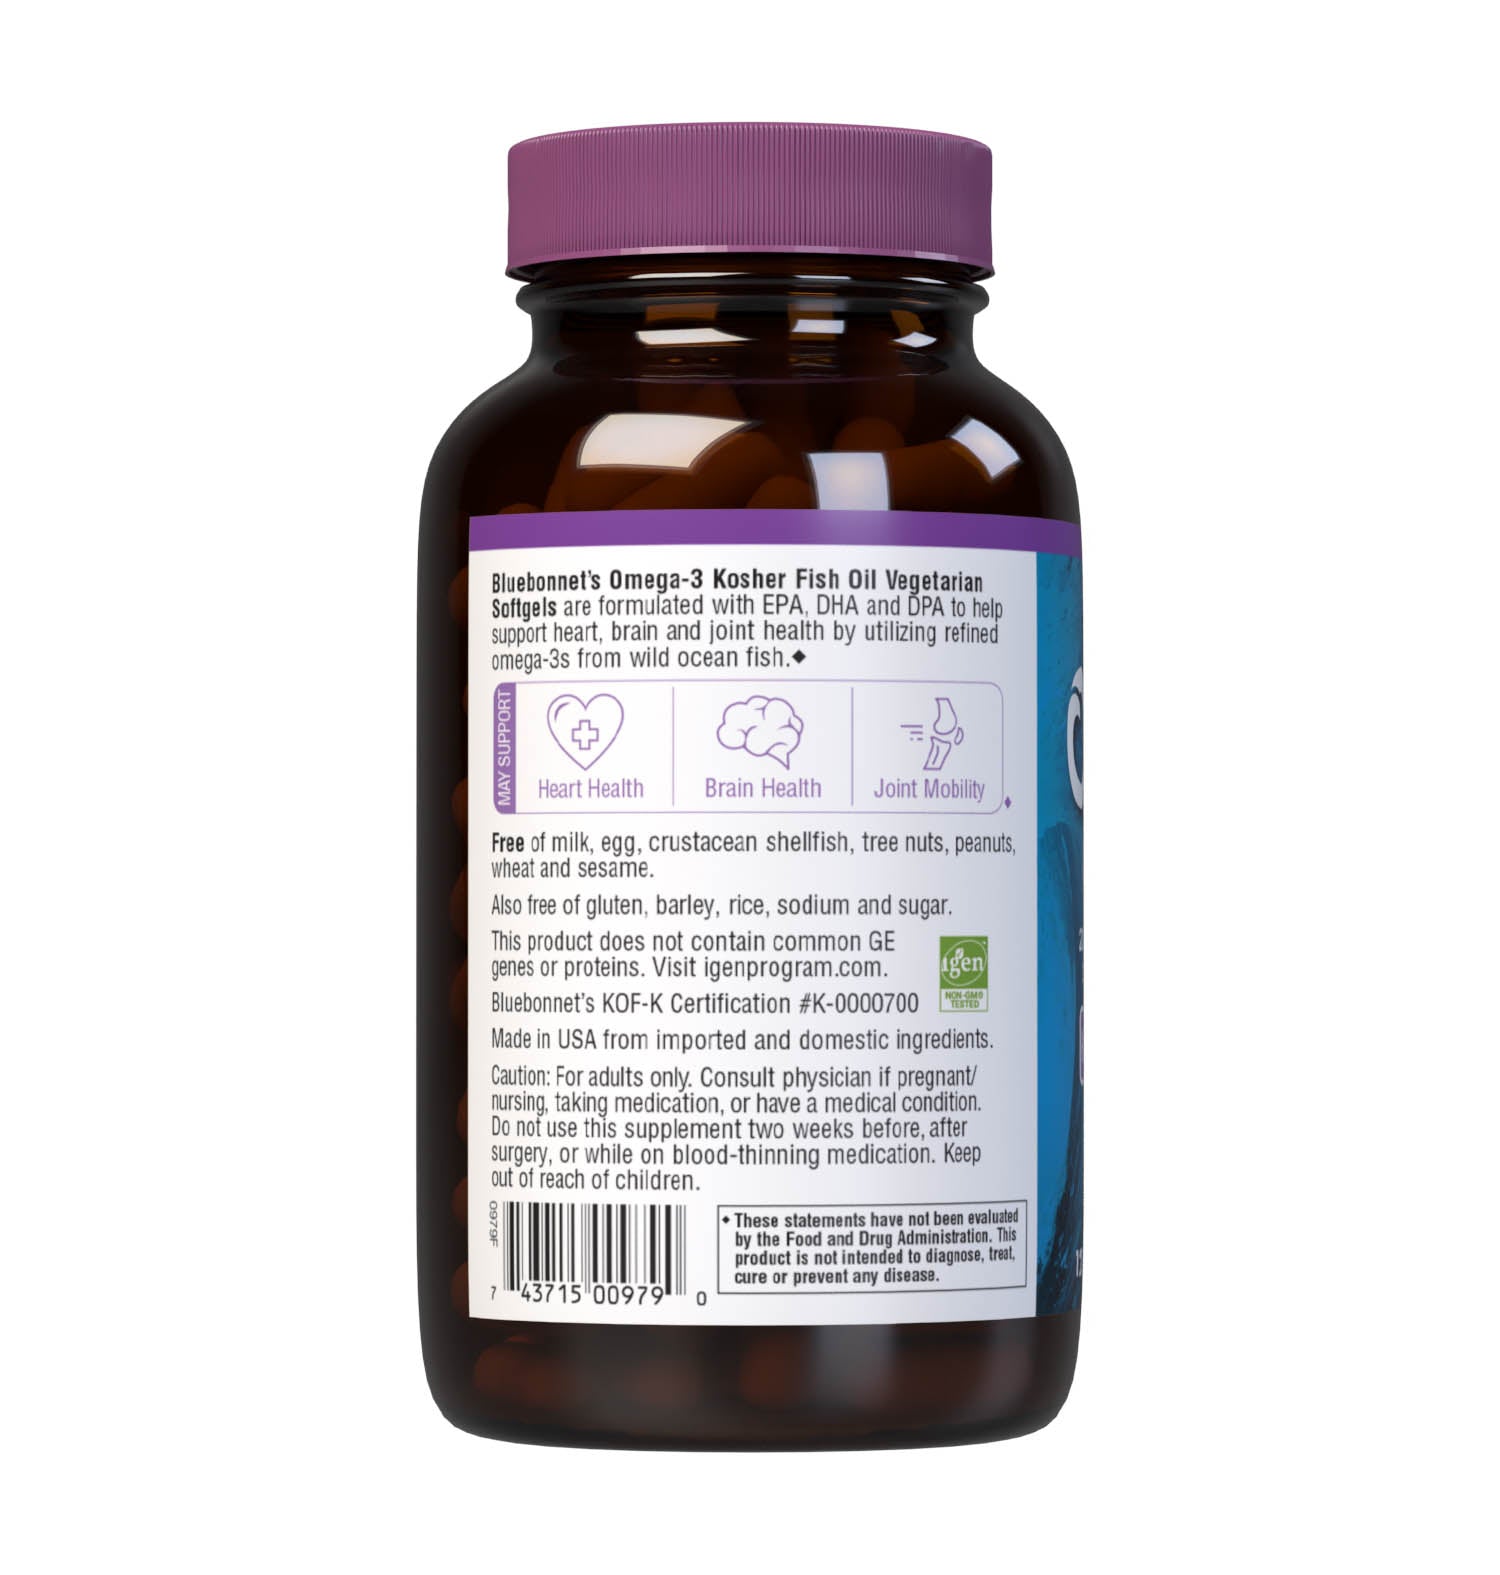 Omega-3 Kosher Fish Oil 120 Vegetarian Softgels are formulated with EPA, DHA and DPA to help support heart, brain and joint health by utilizing refined omega-3s from wild ocean fish. Description panel. #size_120 count